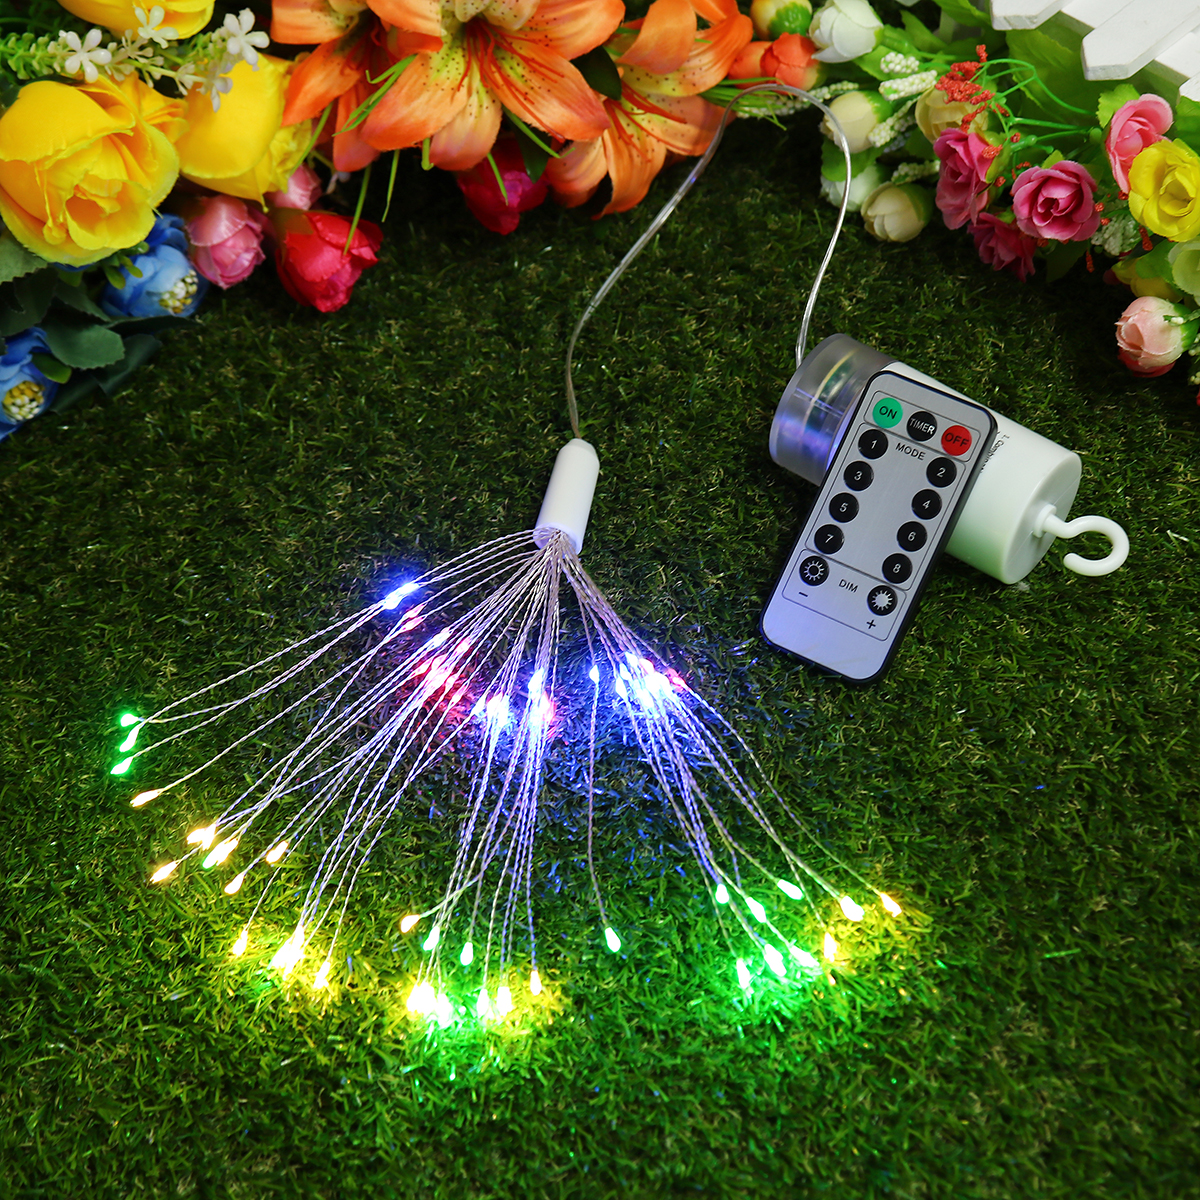 Hanging-LED-Firework-Fairy-String-Light-8Modes-Remote-Home-Party-Wedding-Decor-1691619-7